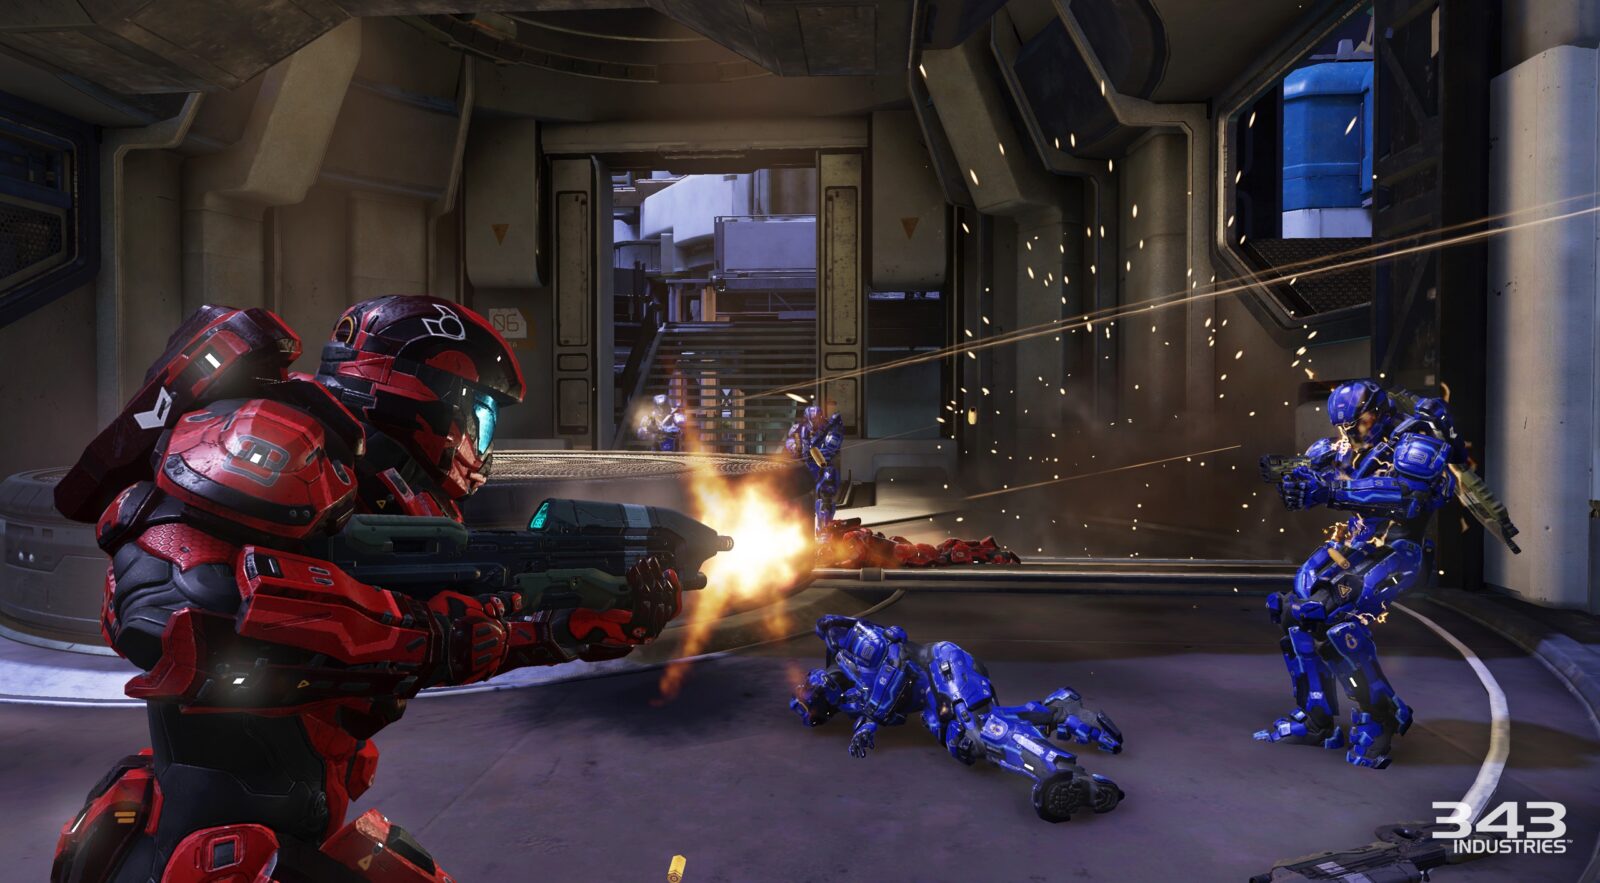 Is Halo 5 even worth playing?